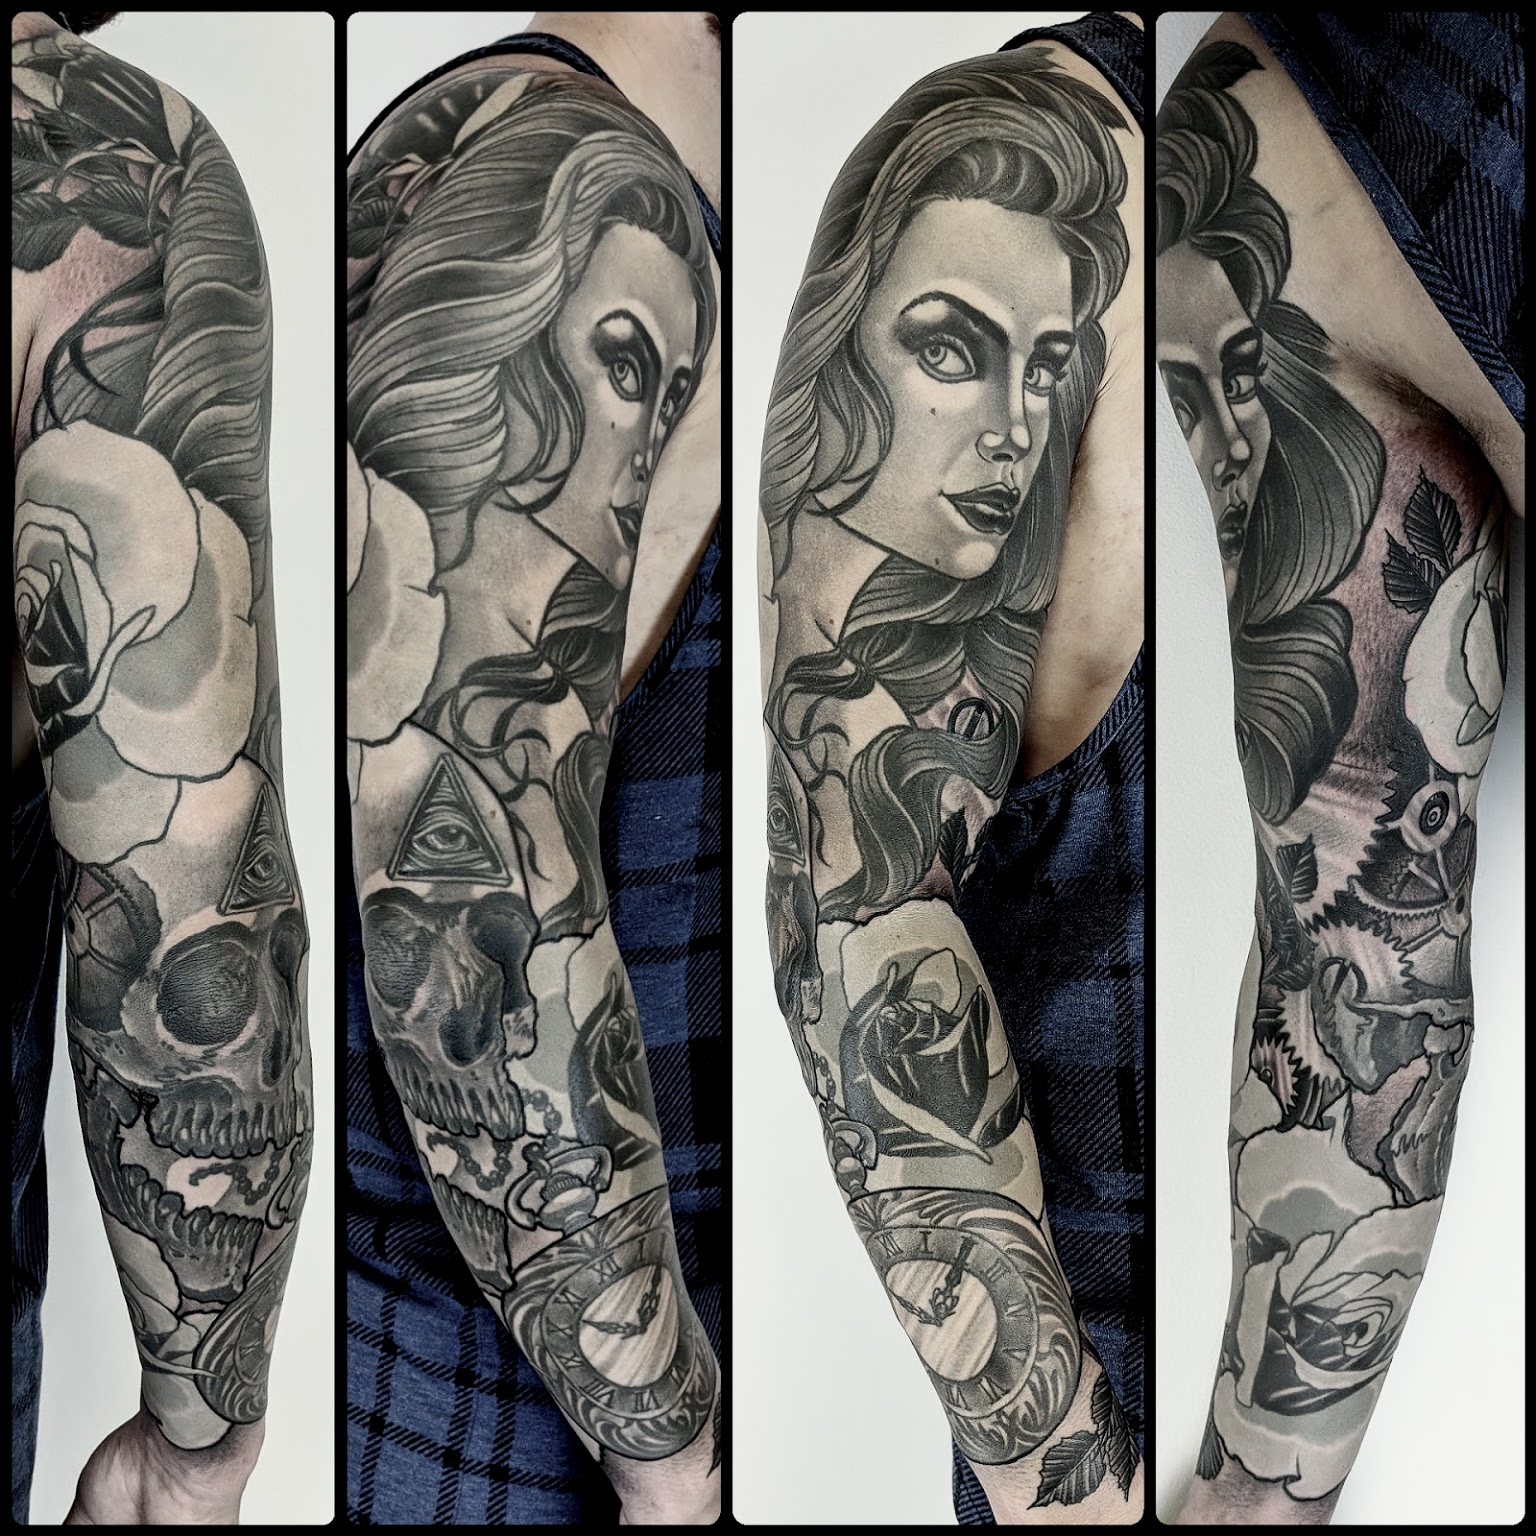 Neo traditional tattoo black and grey Lady’s face skull roses and pocket watch by ricks custom tattooing Ricardo Pedro at nexus collective